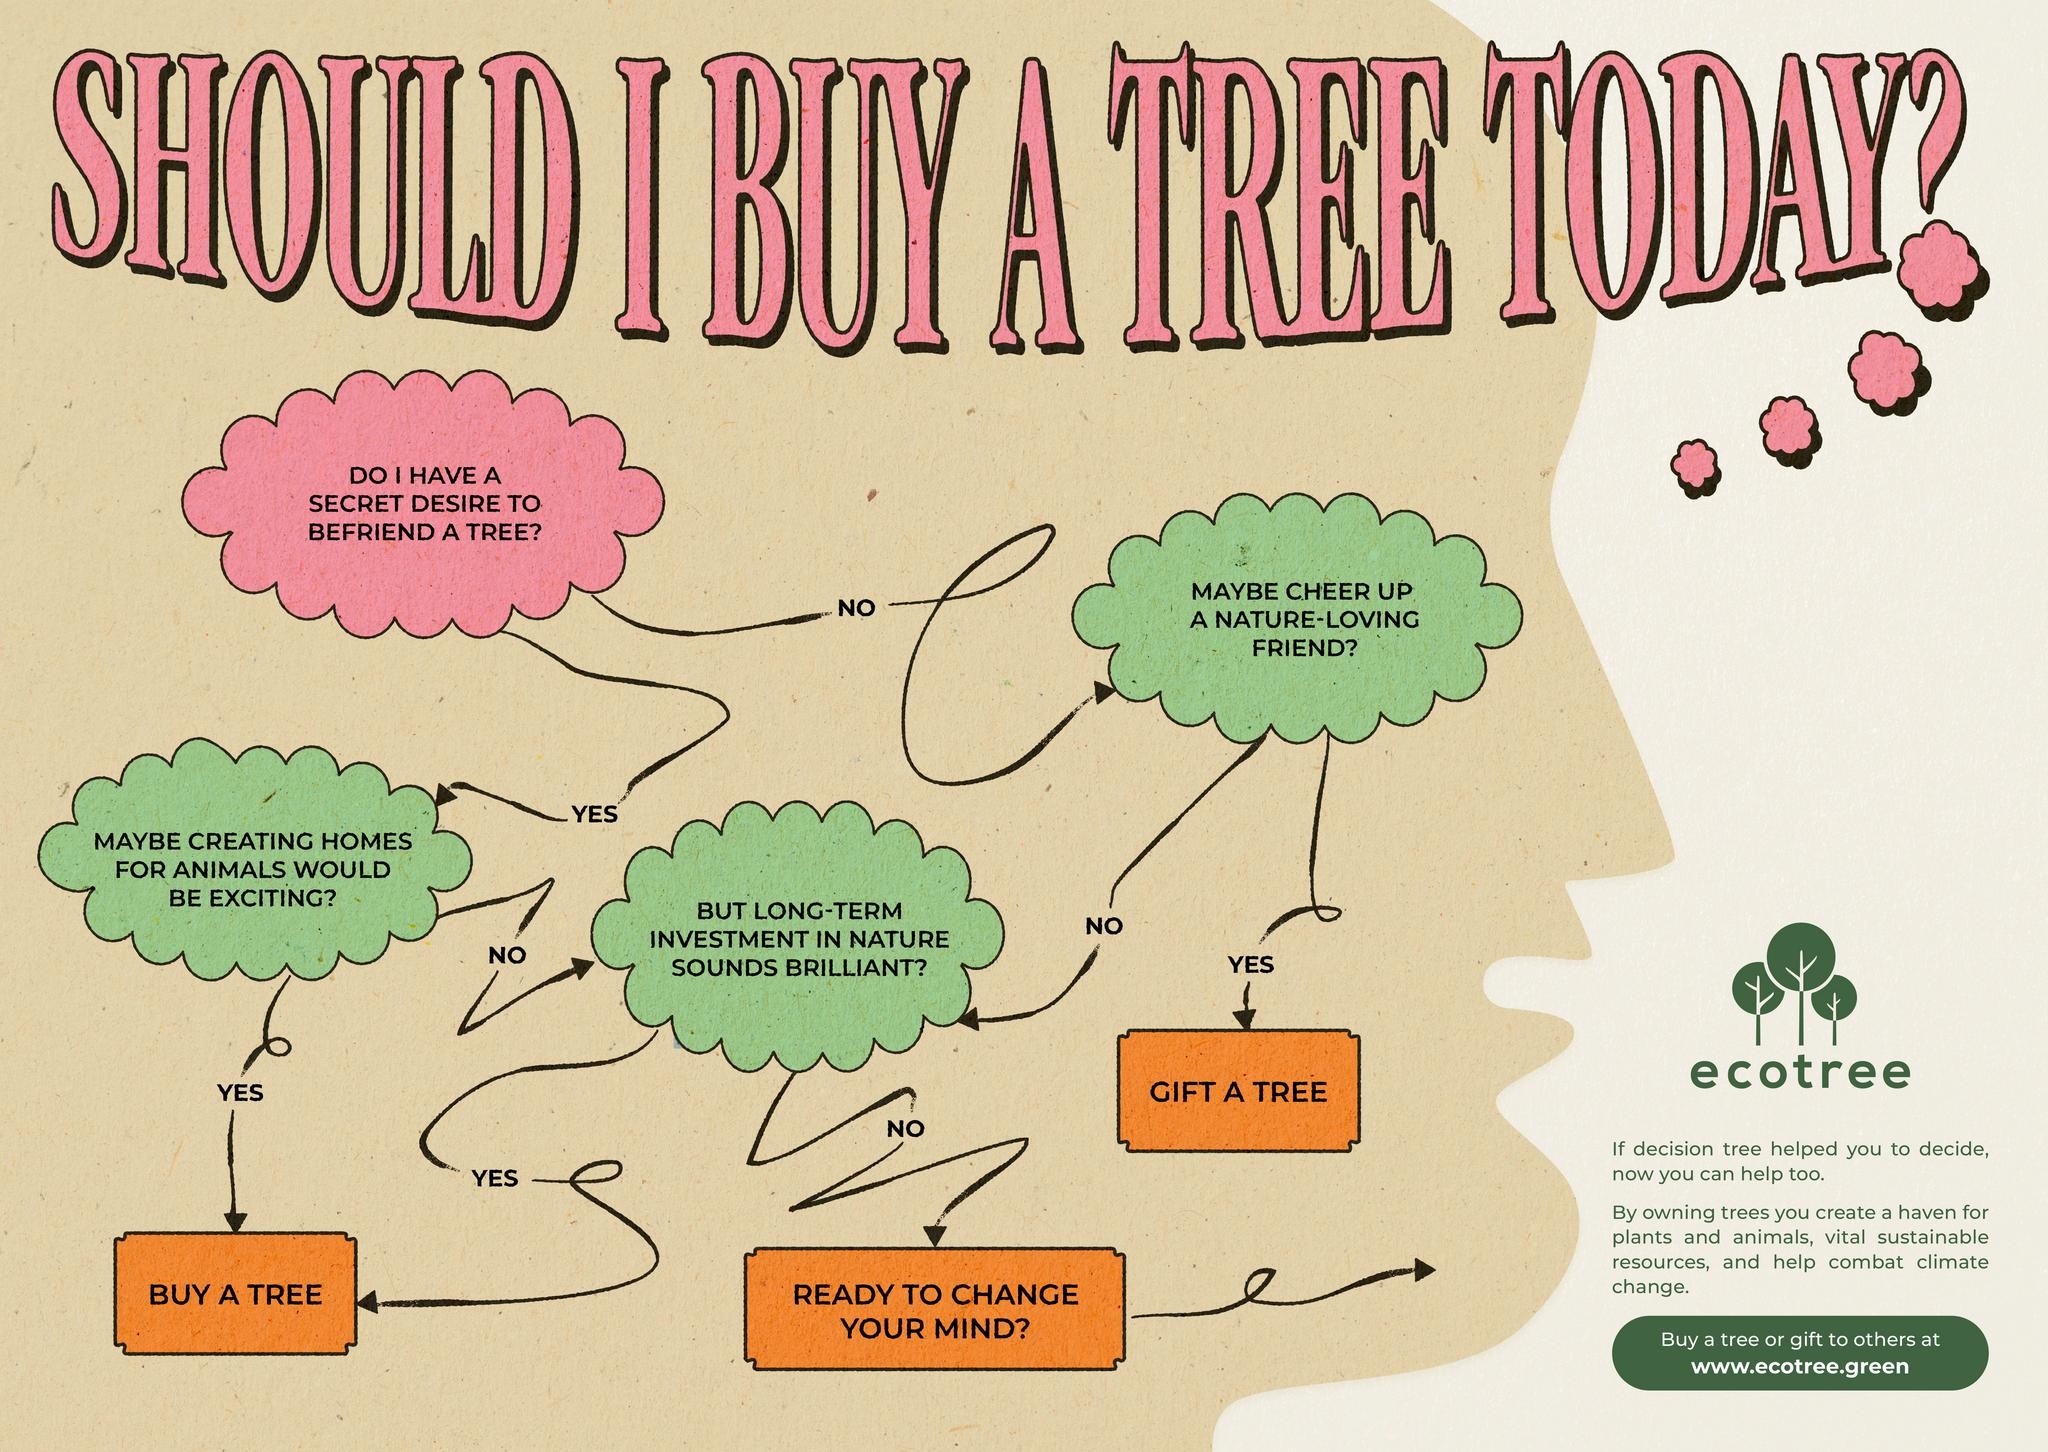 Decision tree for trees